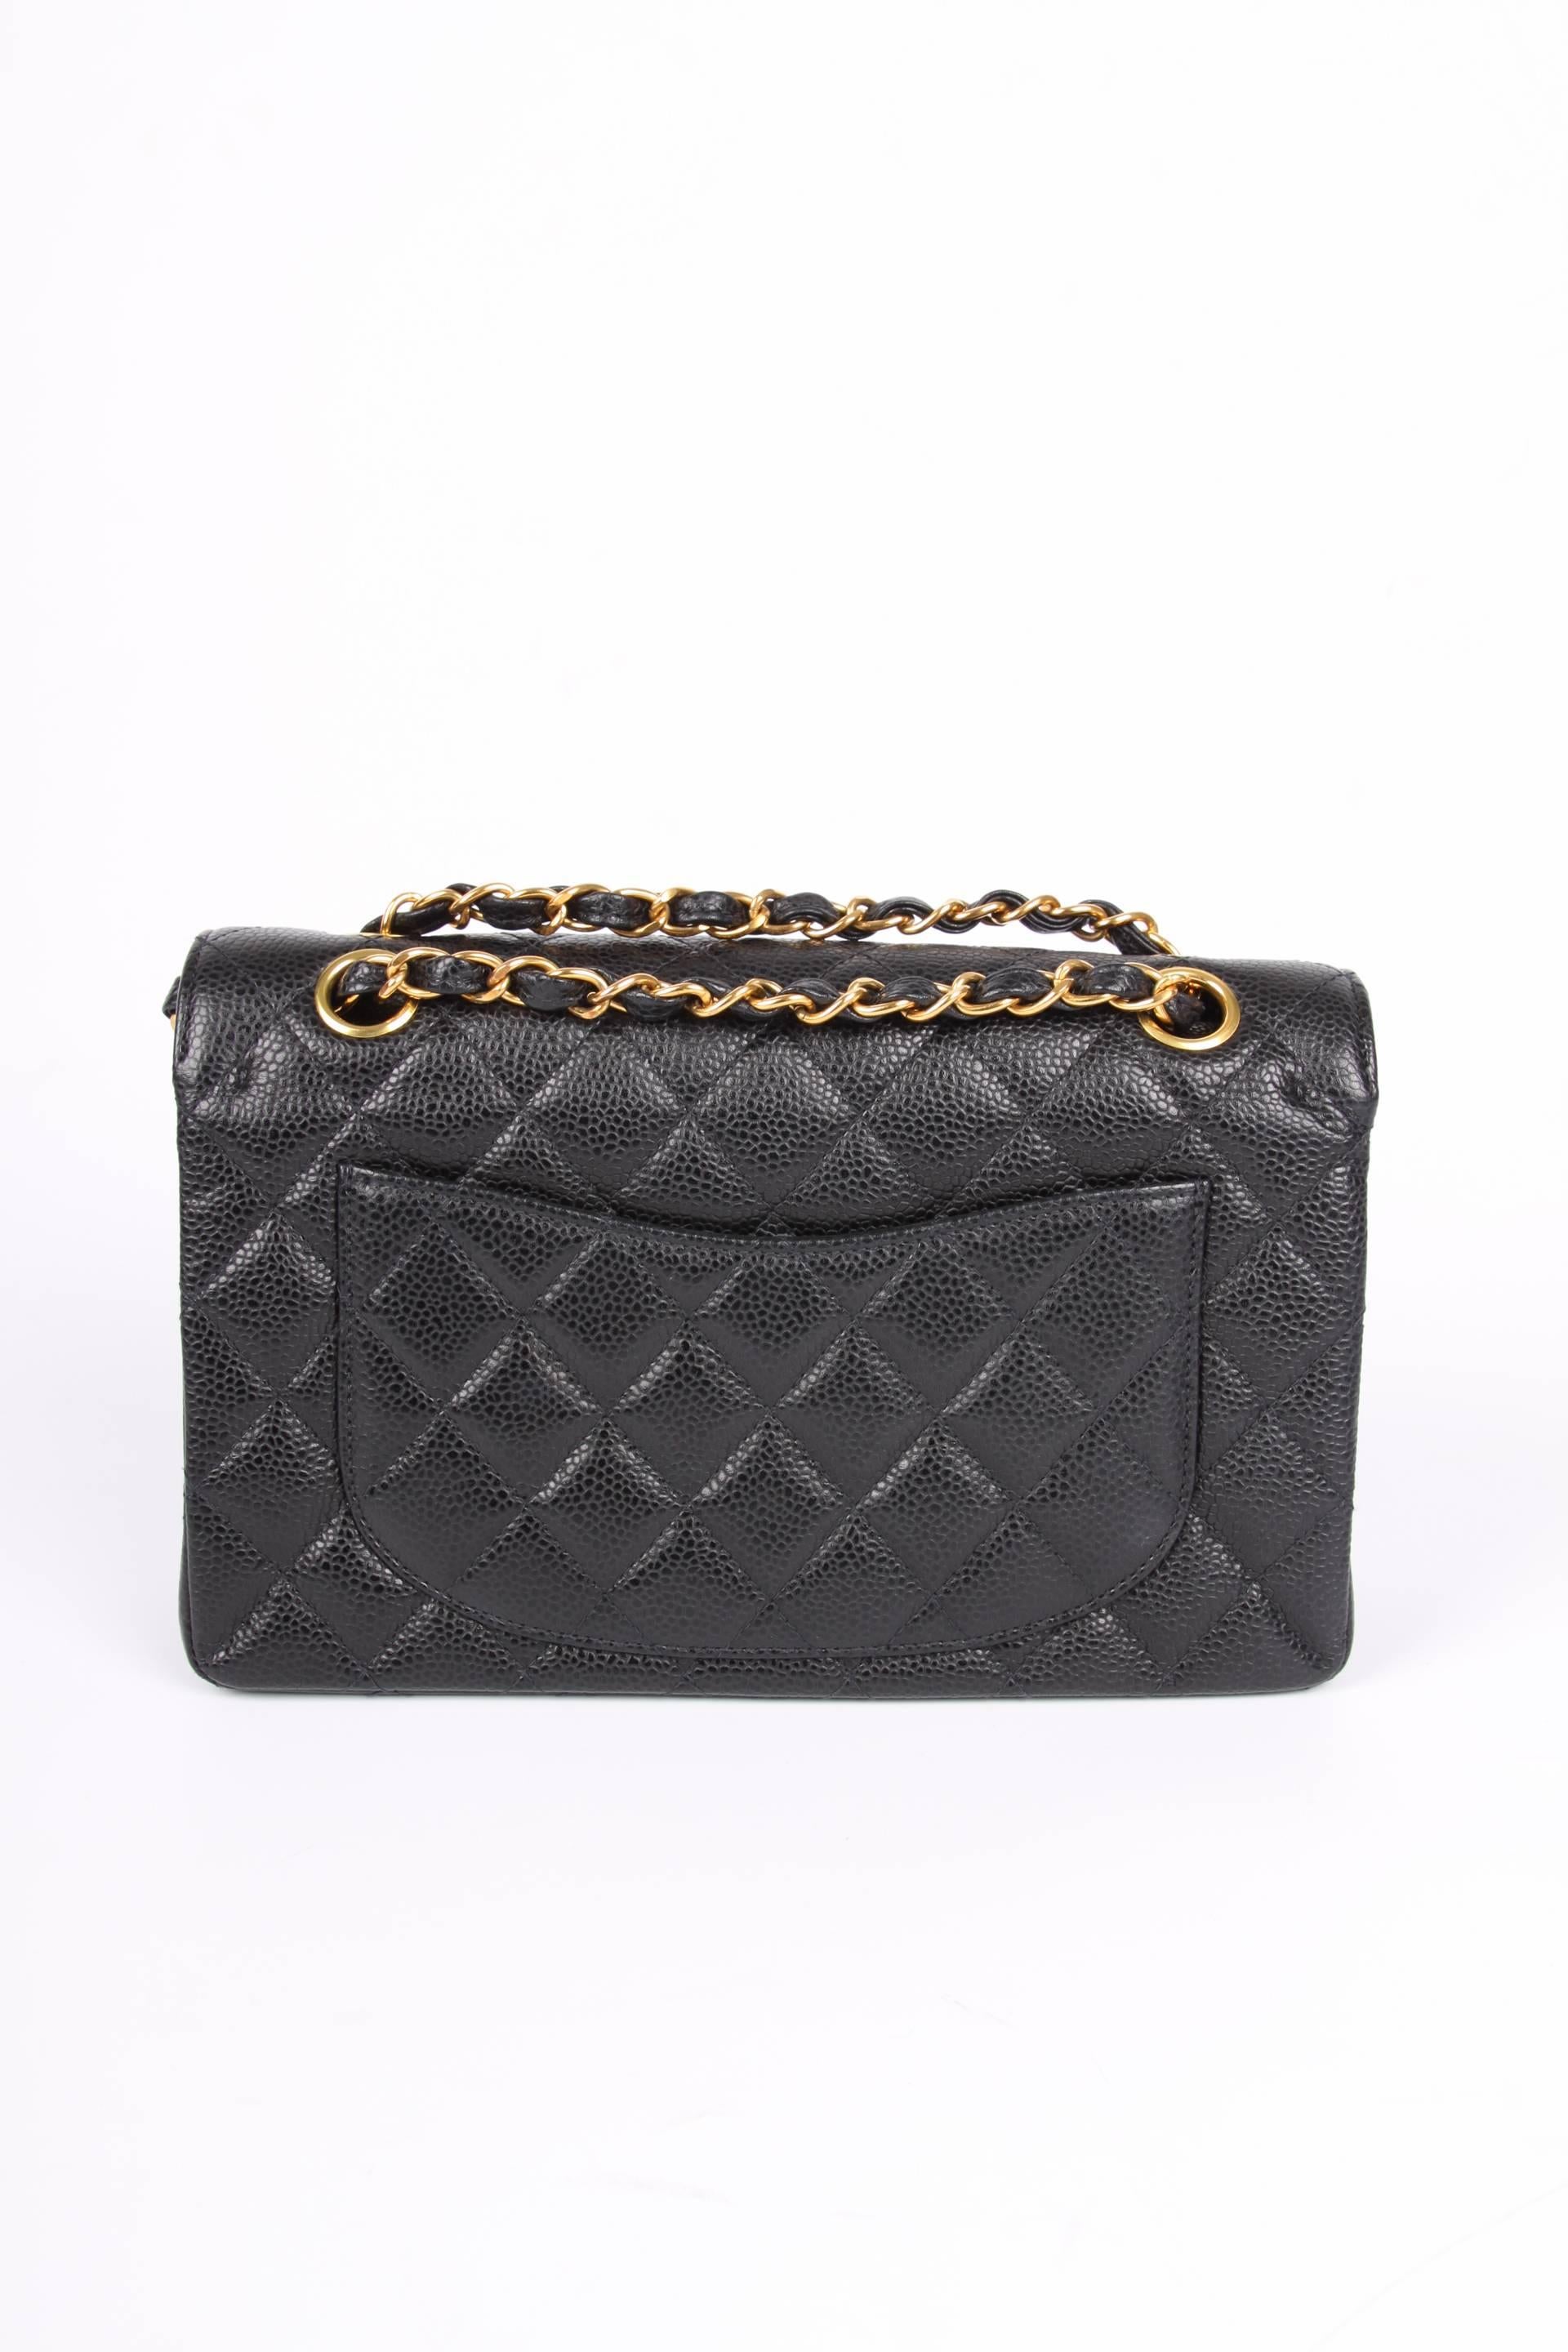 Chanel 2.55 Timeless Small Double Flap Bag - black caviar leather In New Condition In Baarn, NL